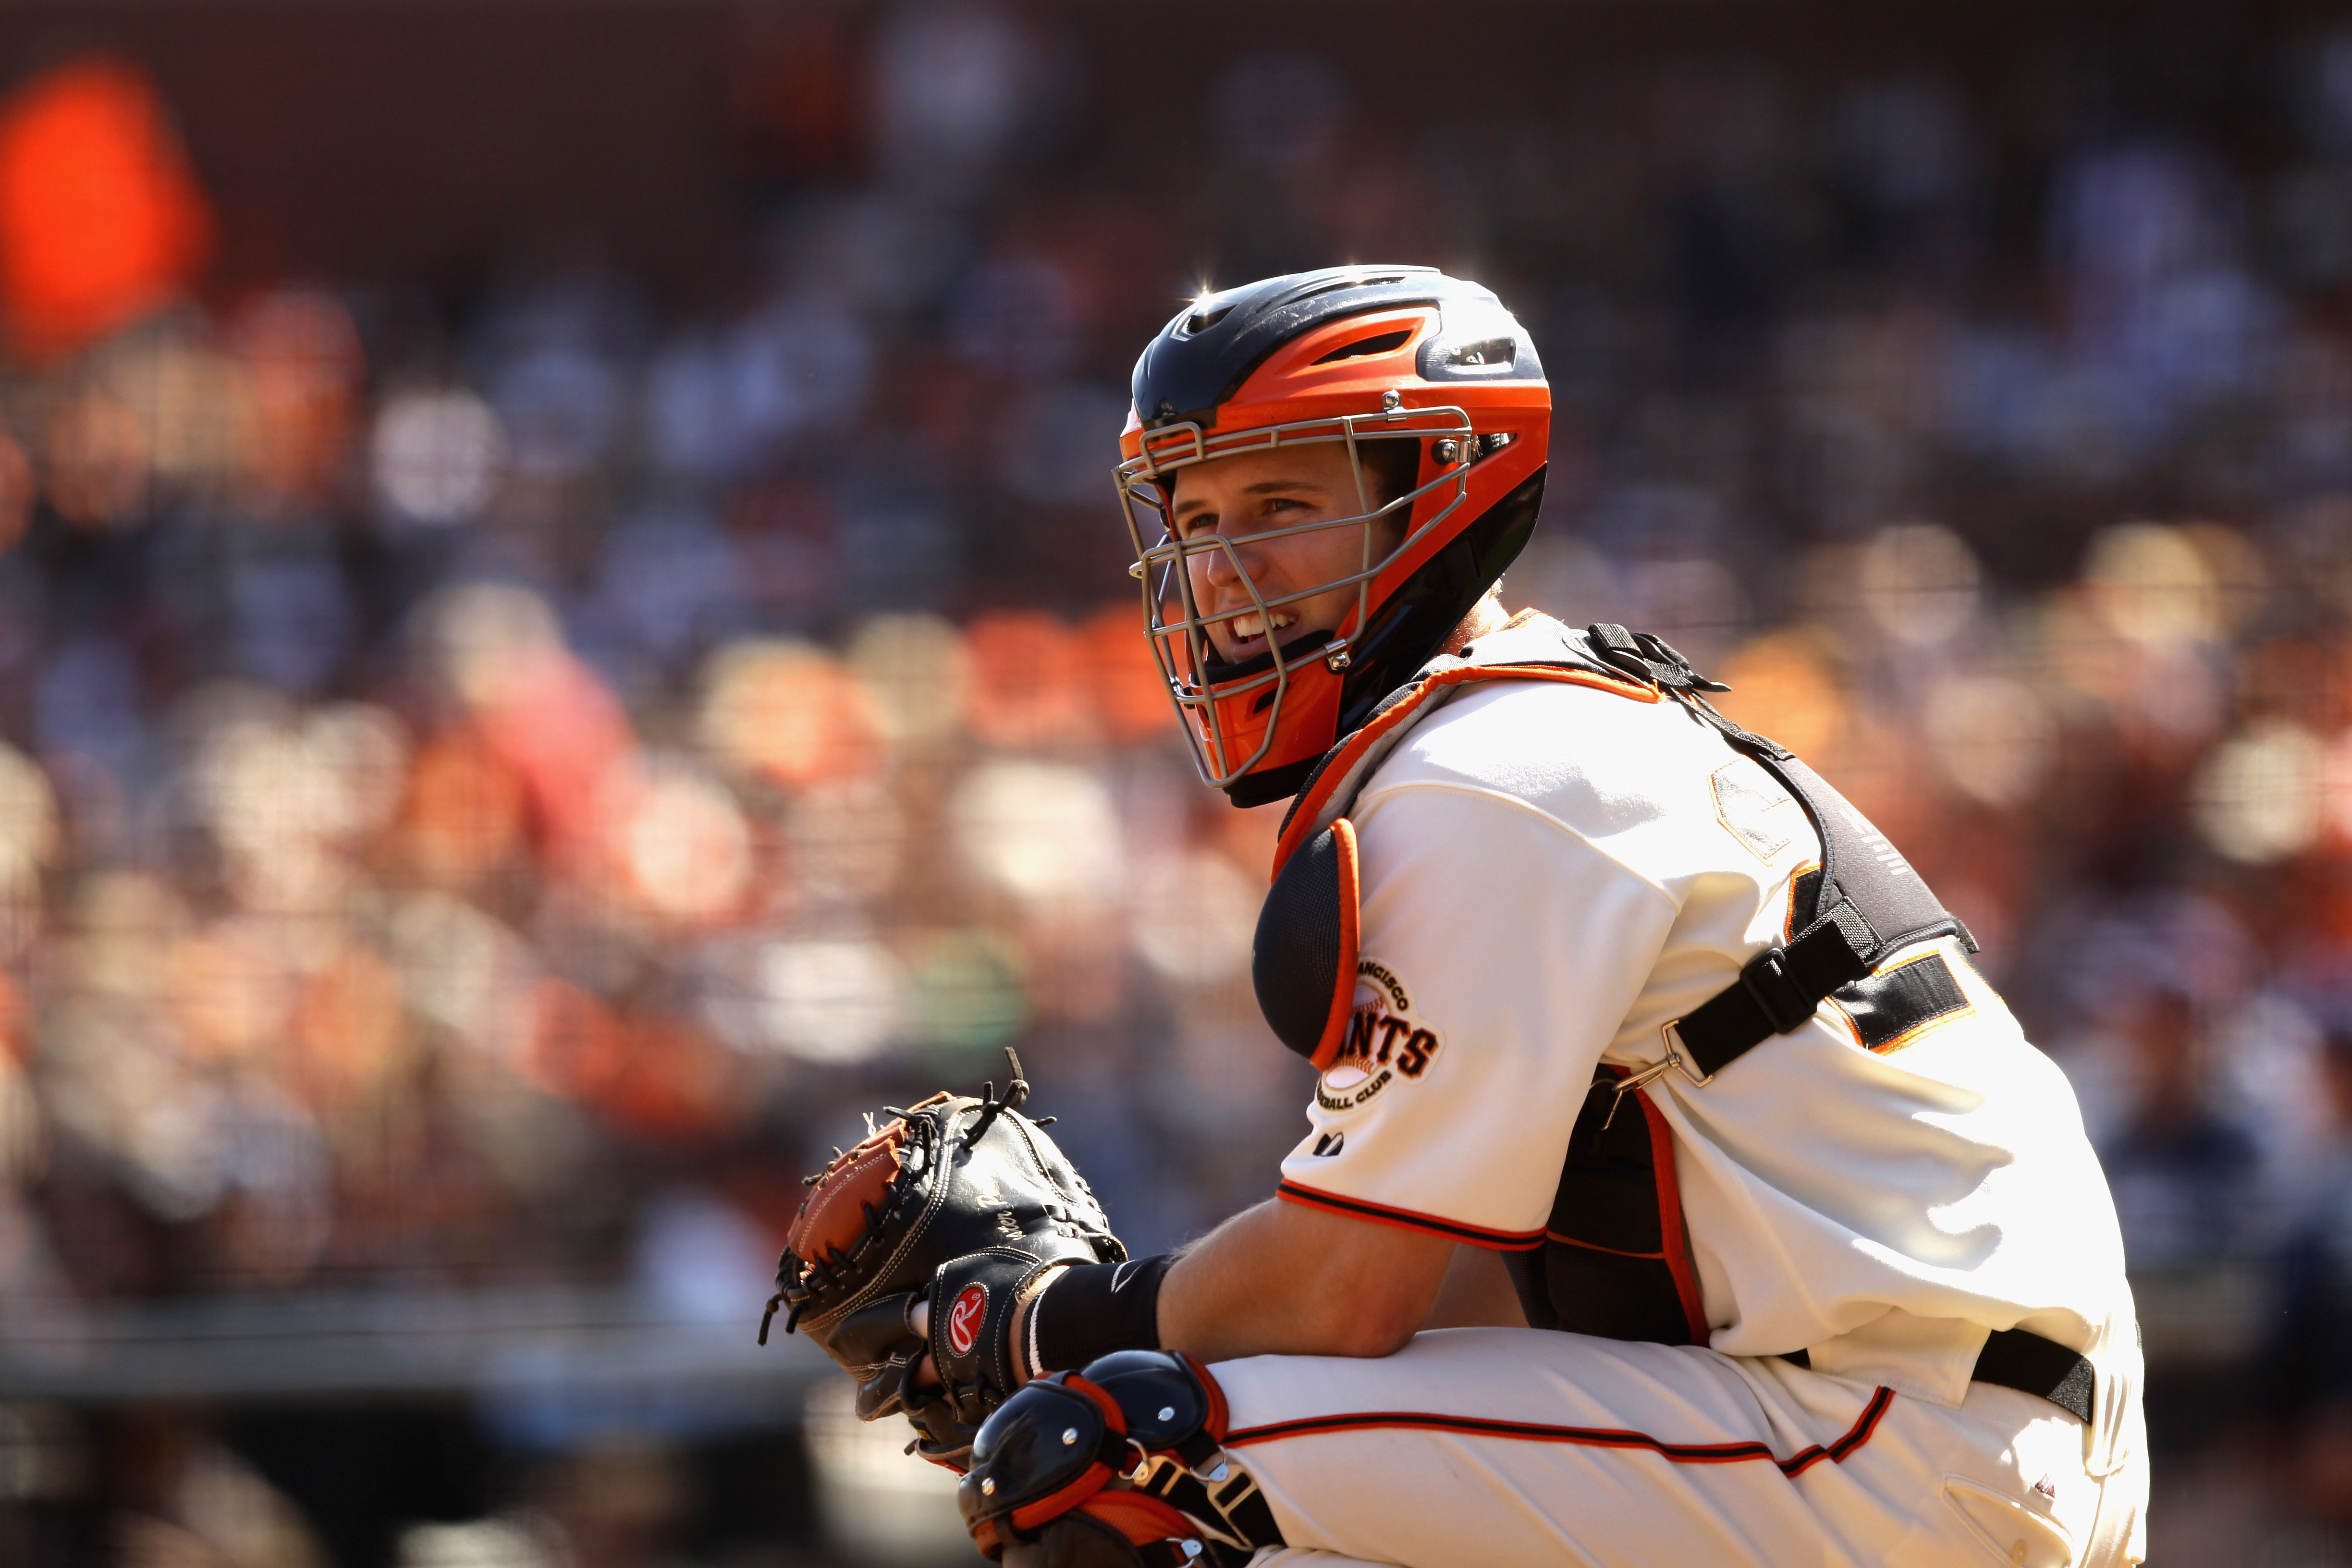 MLB - One of the best catchers of all time. #ThankYouBuster Watch Buster  Posey Day live: atmlb.com/38665s0